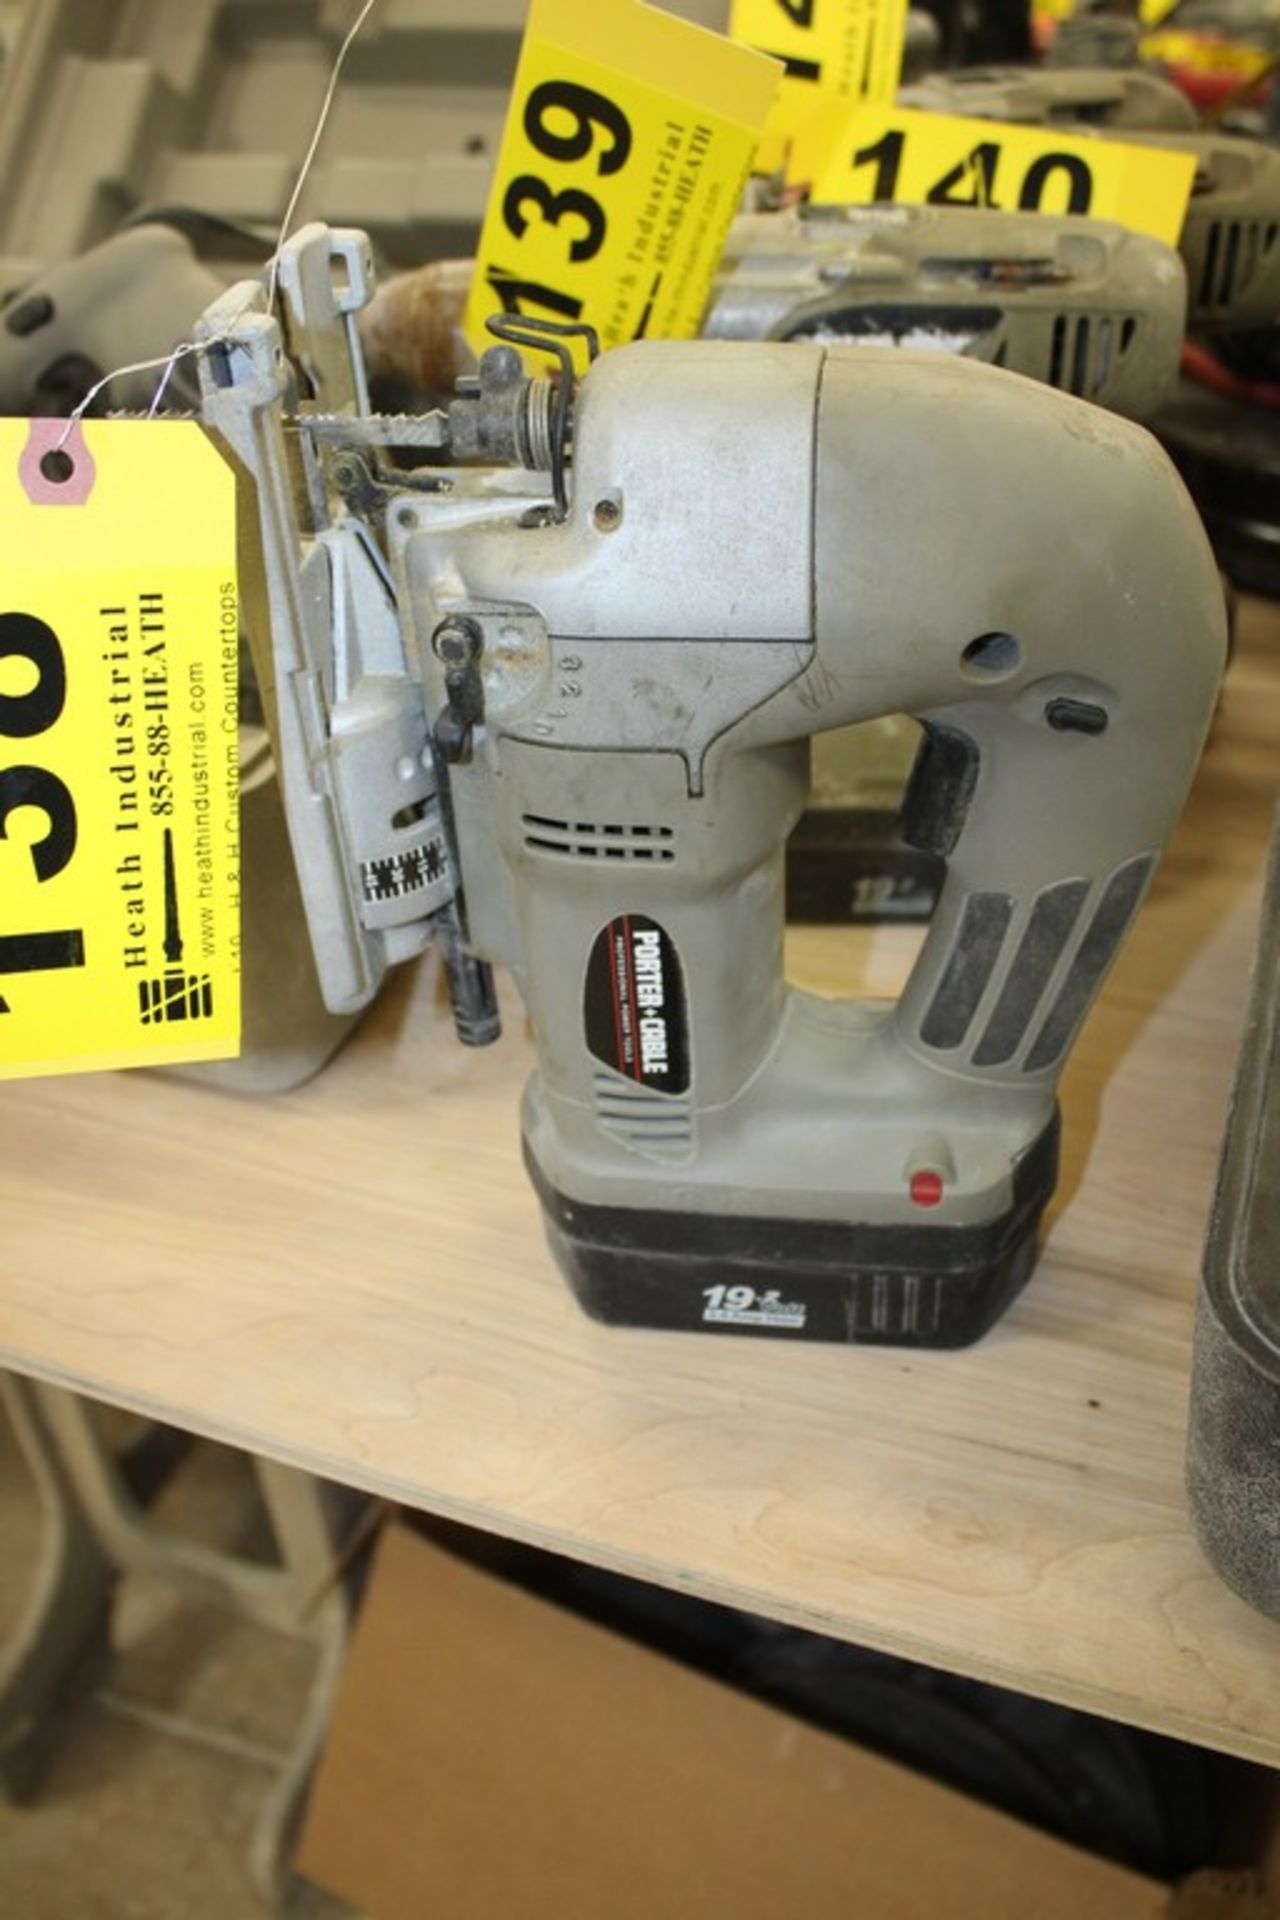 PORTER CABLE BATTERY OPERATED JIG SAW MODEL 643 19.2 VOLT